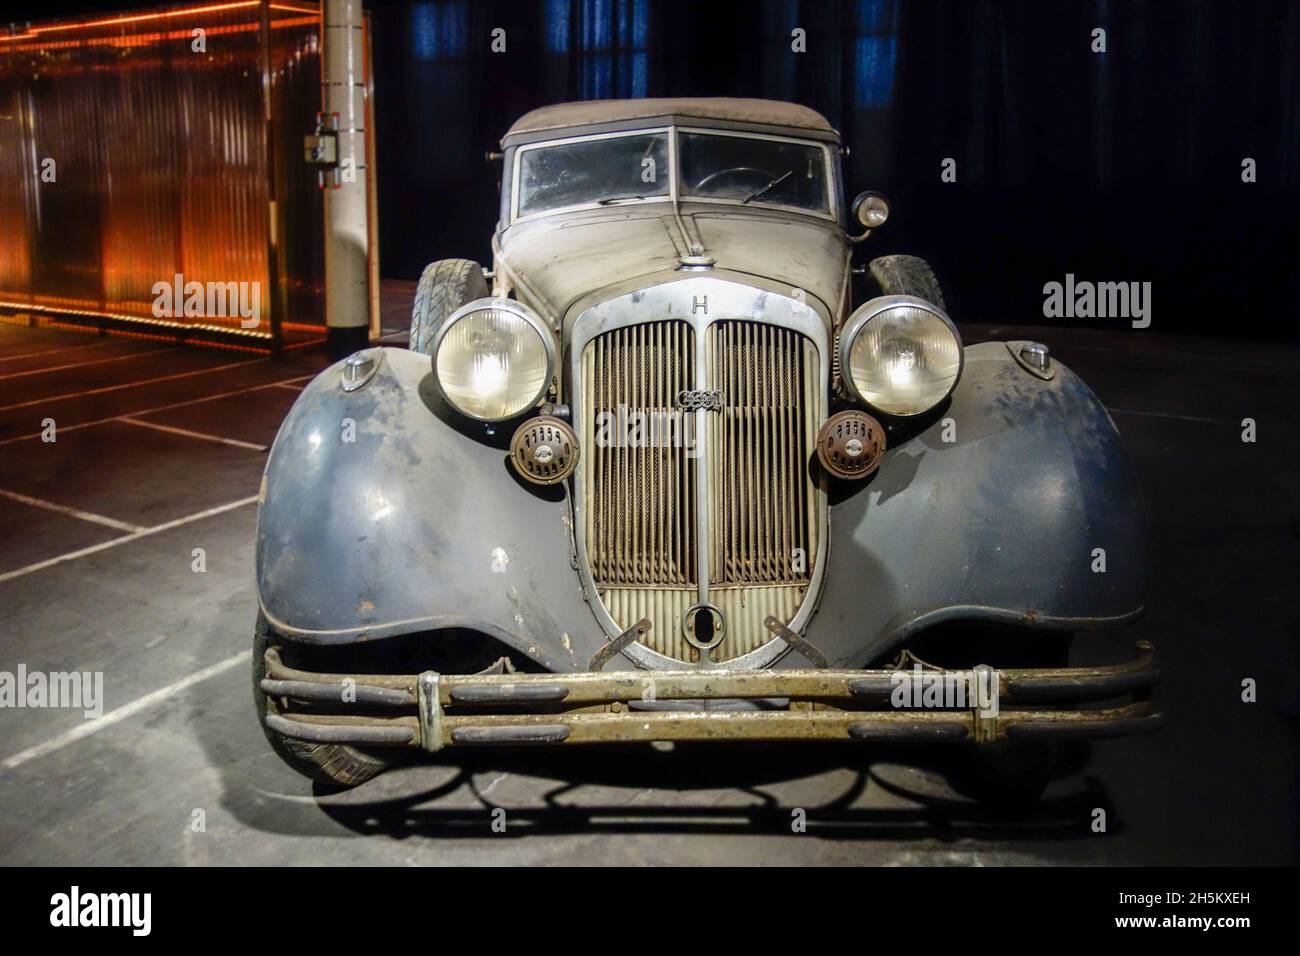 Rusty and dusty 1937 Horch Typ 853, German classic car / oldtimer, in bad shape ready to be restored in garage Stock Photo